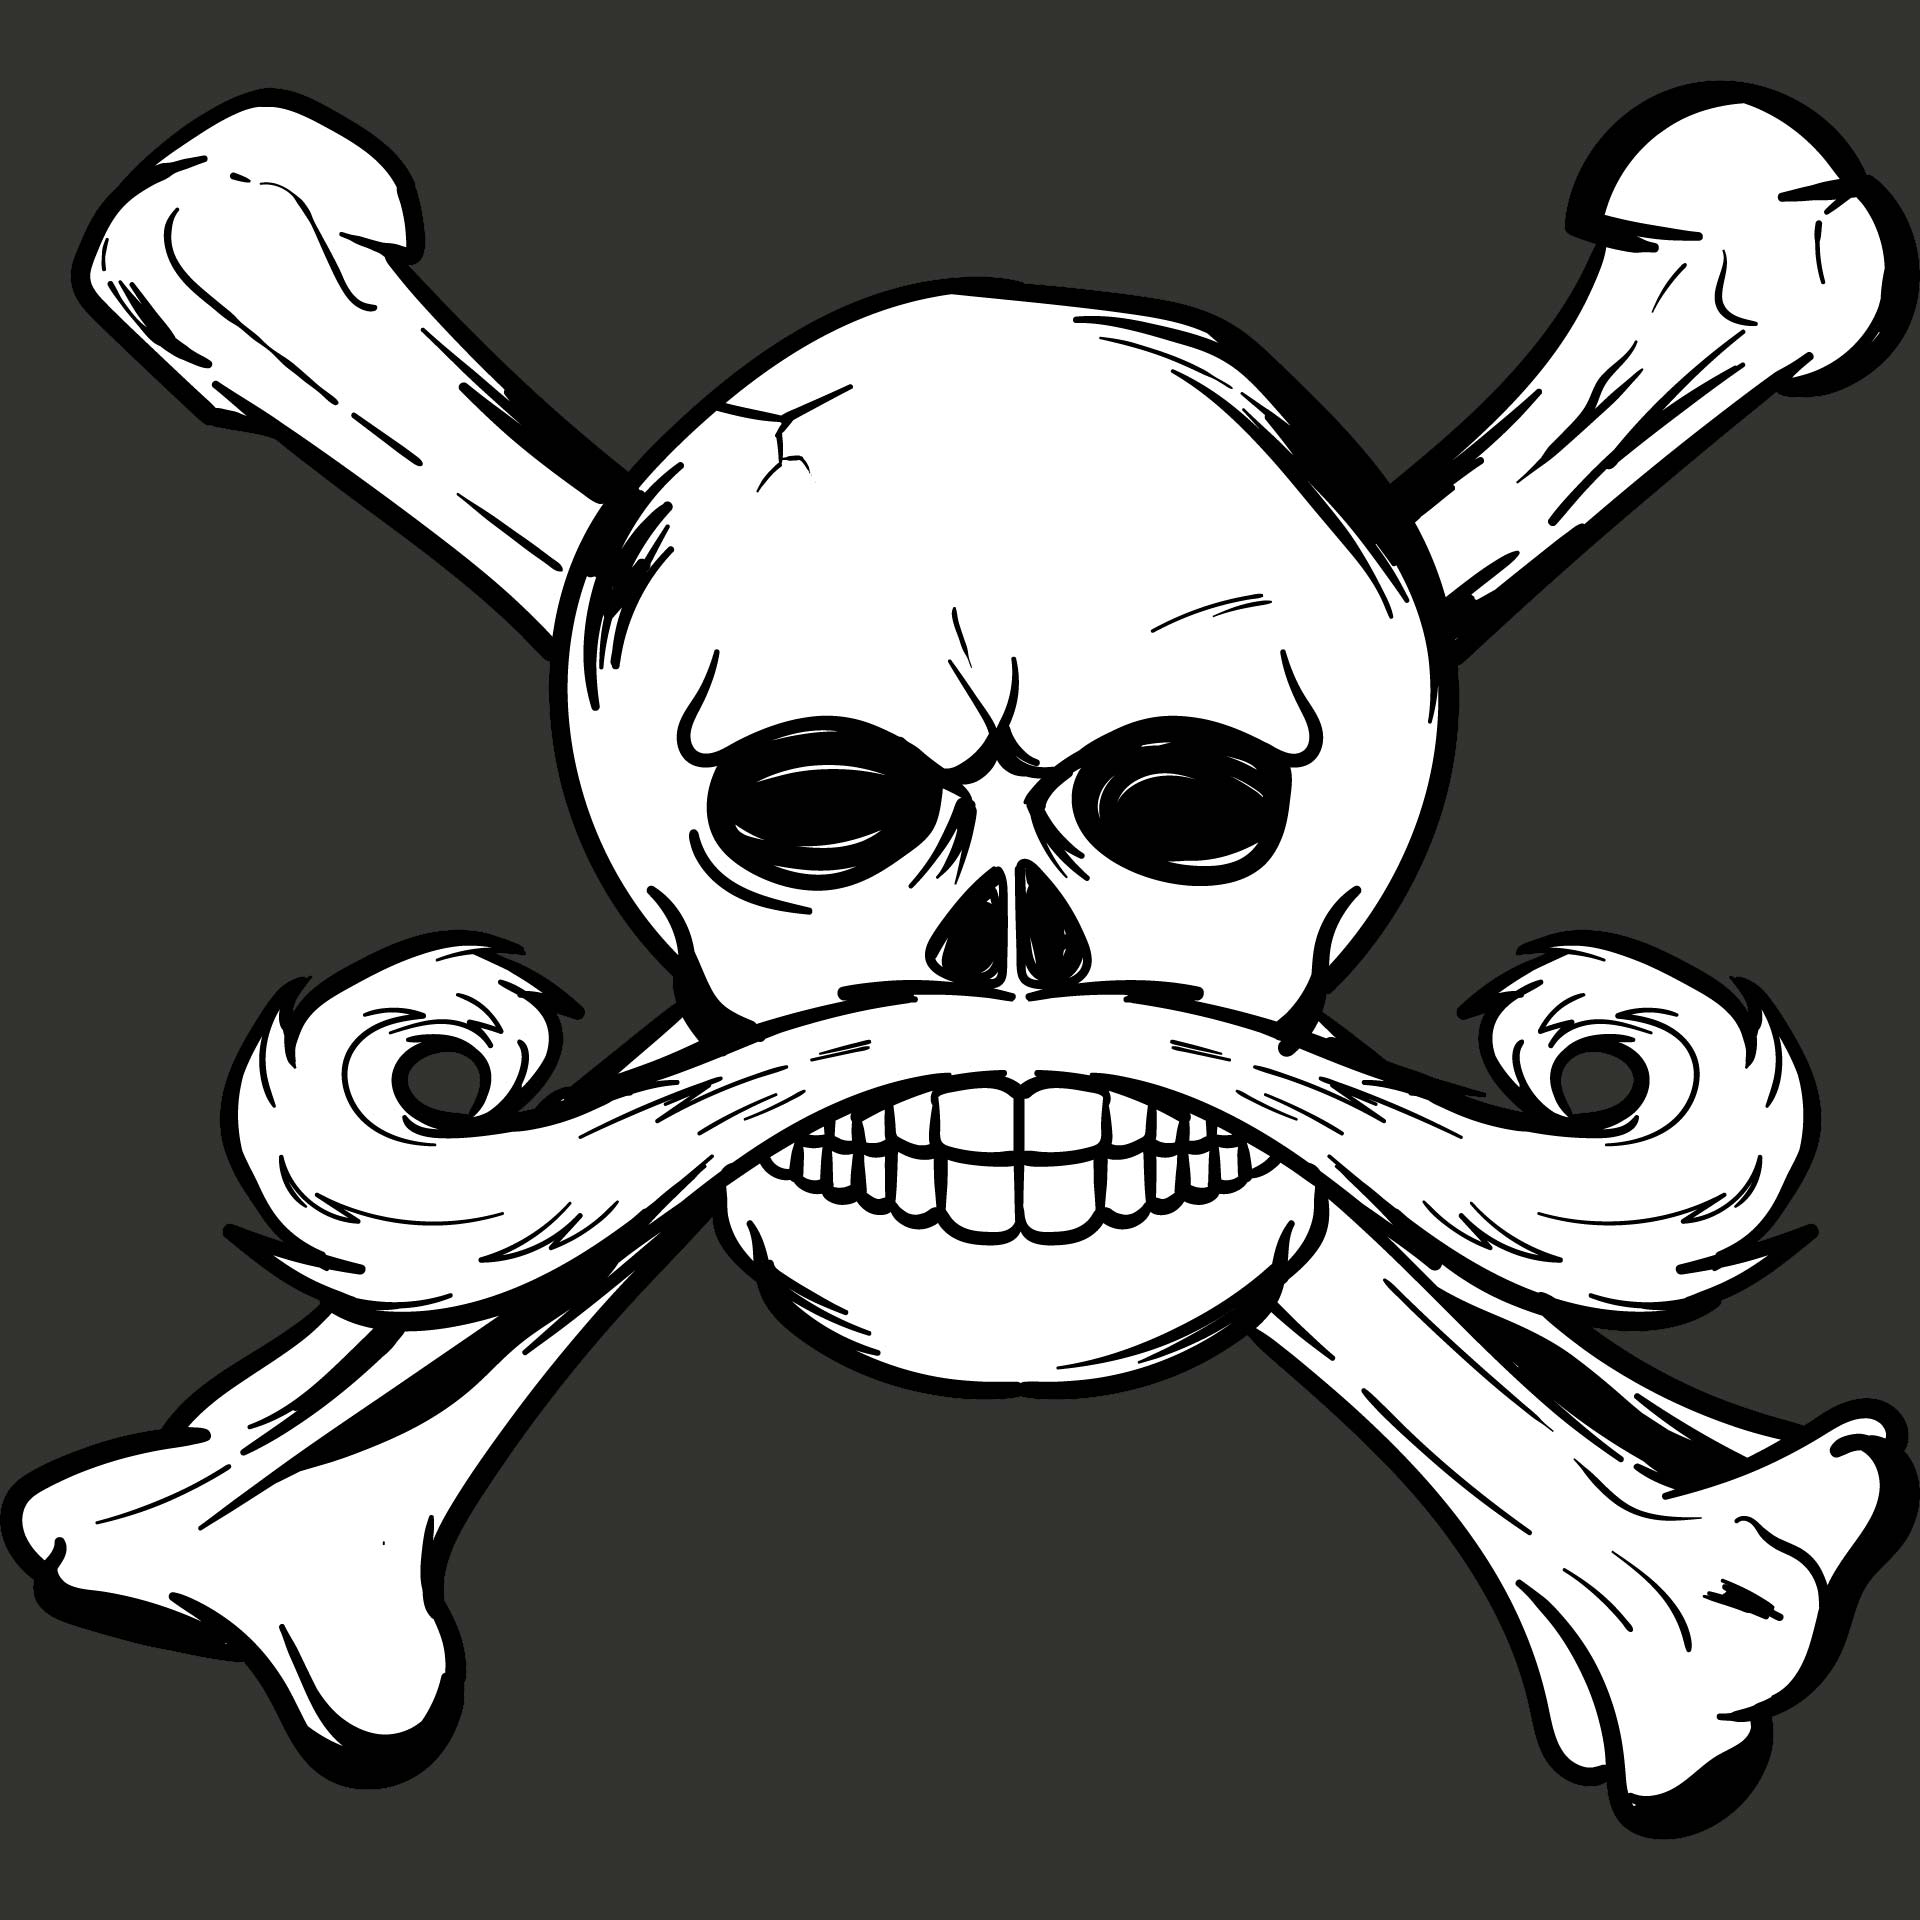 Pirate Skull and Crossbones Template